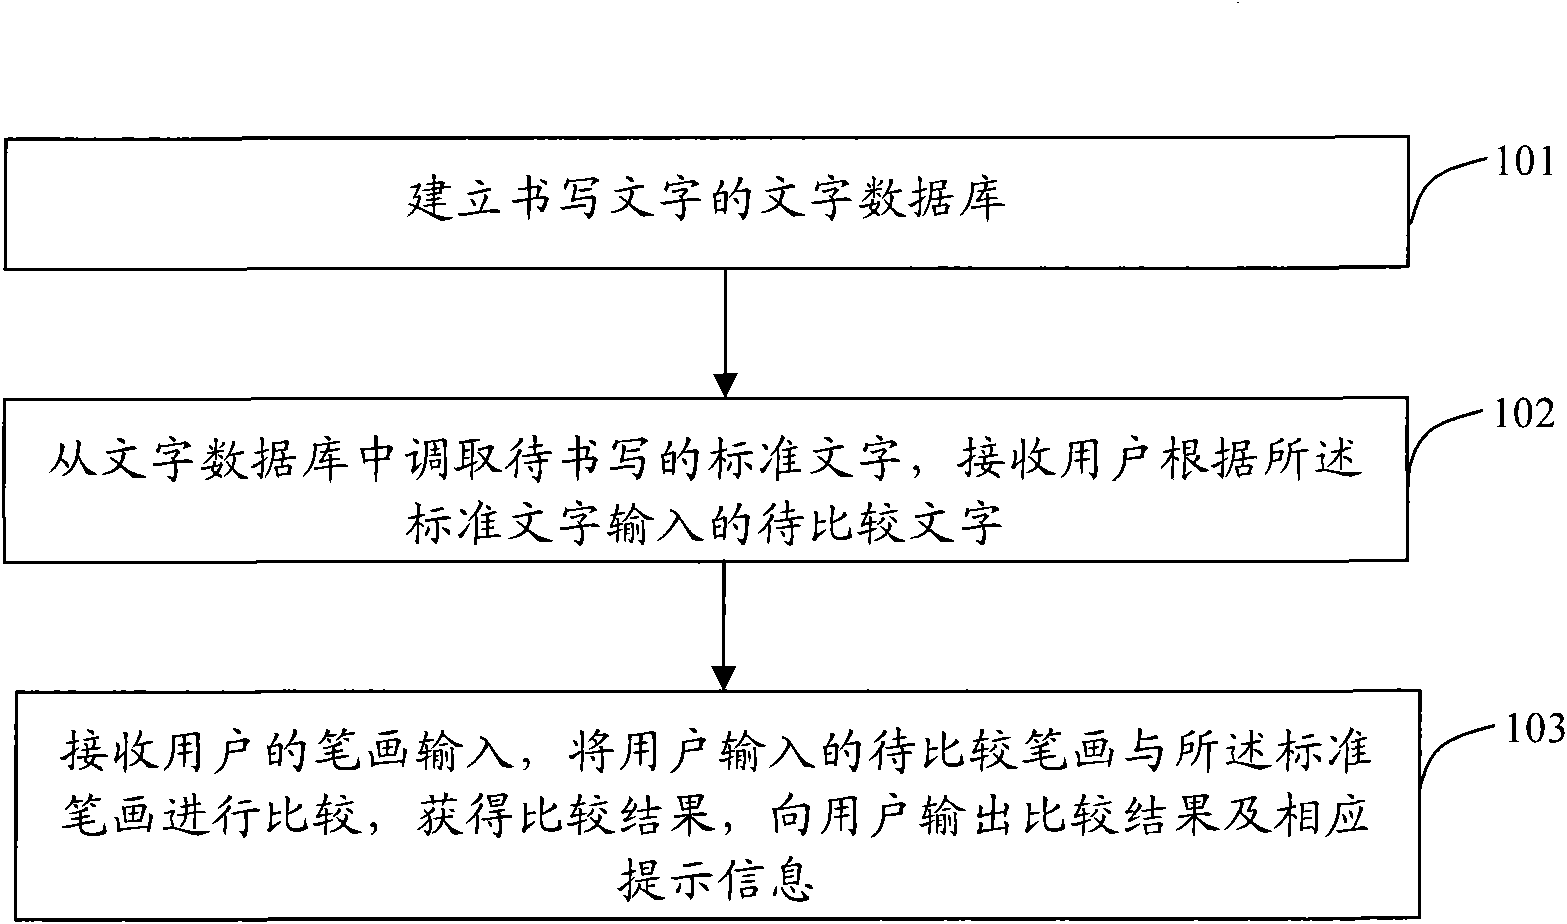 Method and device for writing characters on touch screen